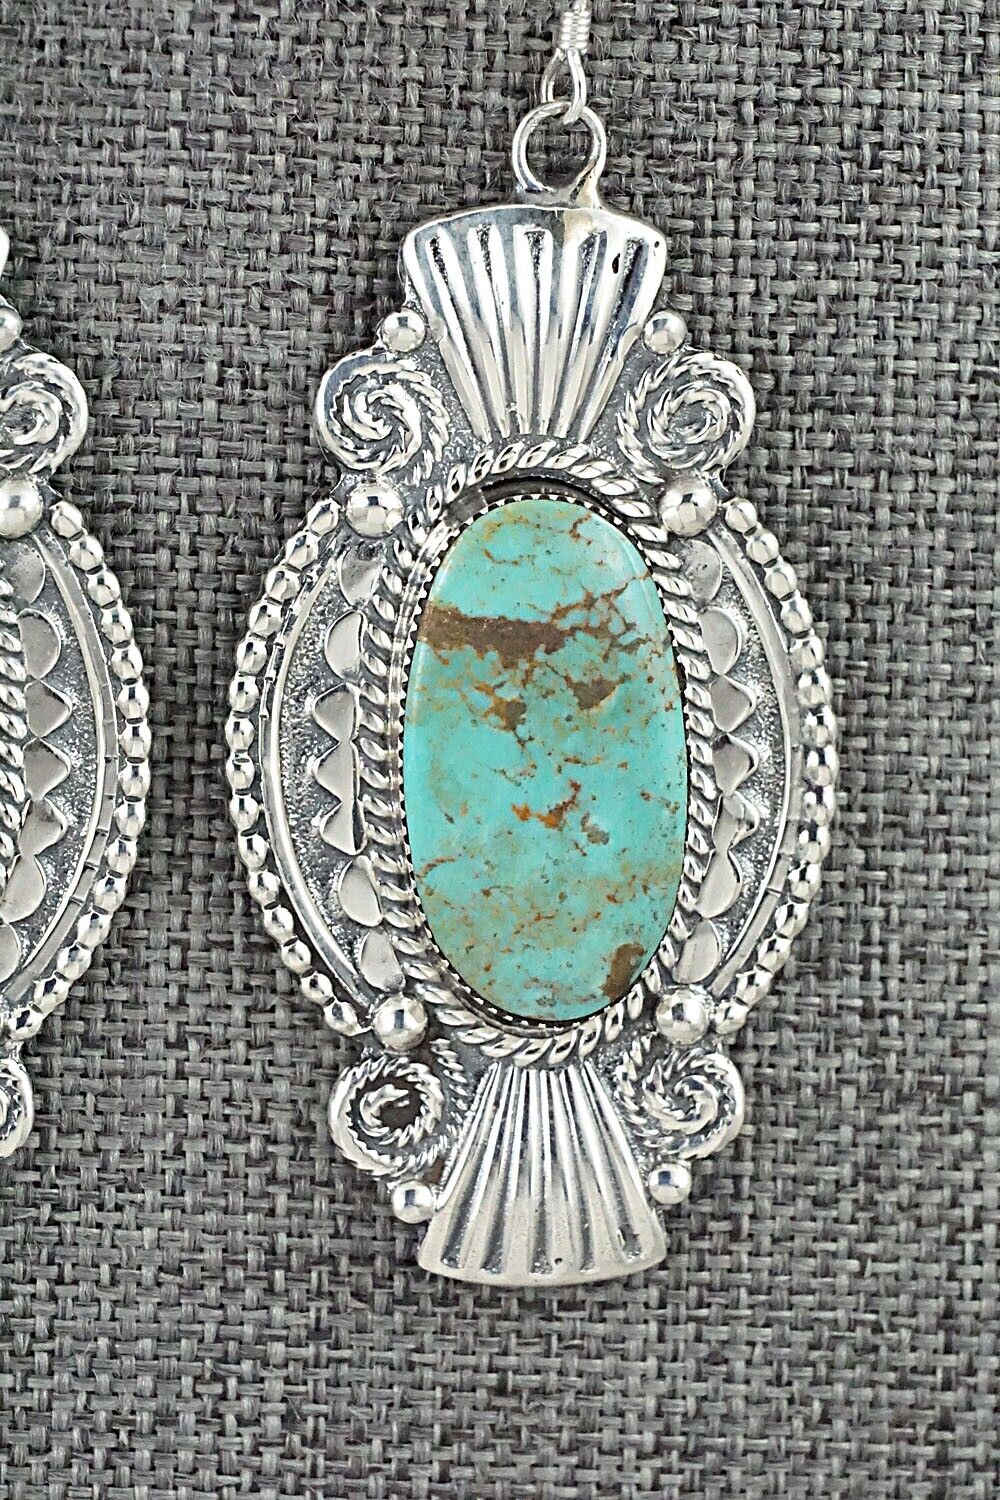 Turquoise and Sterling Silver Earrings - Irvin Tsosie